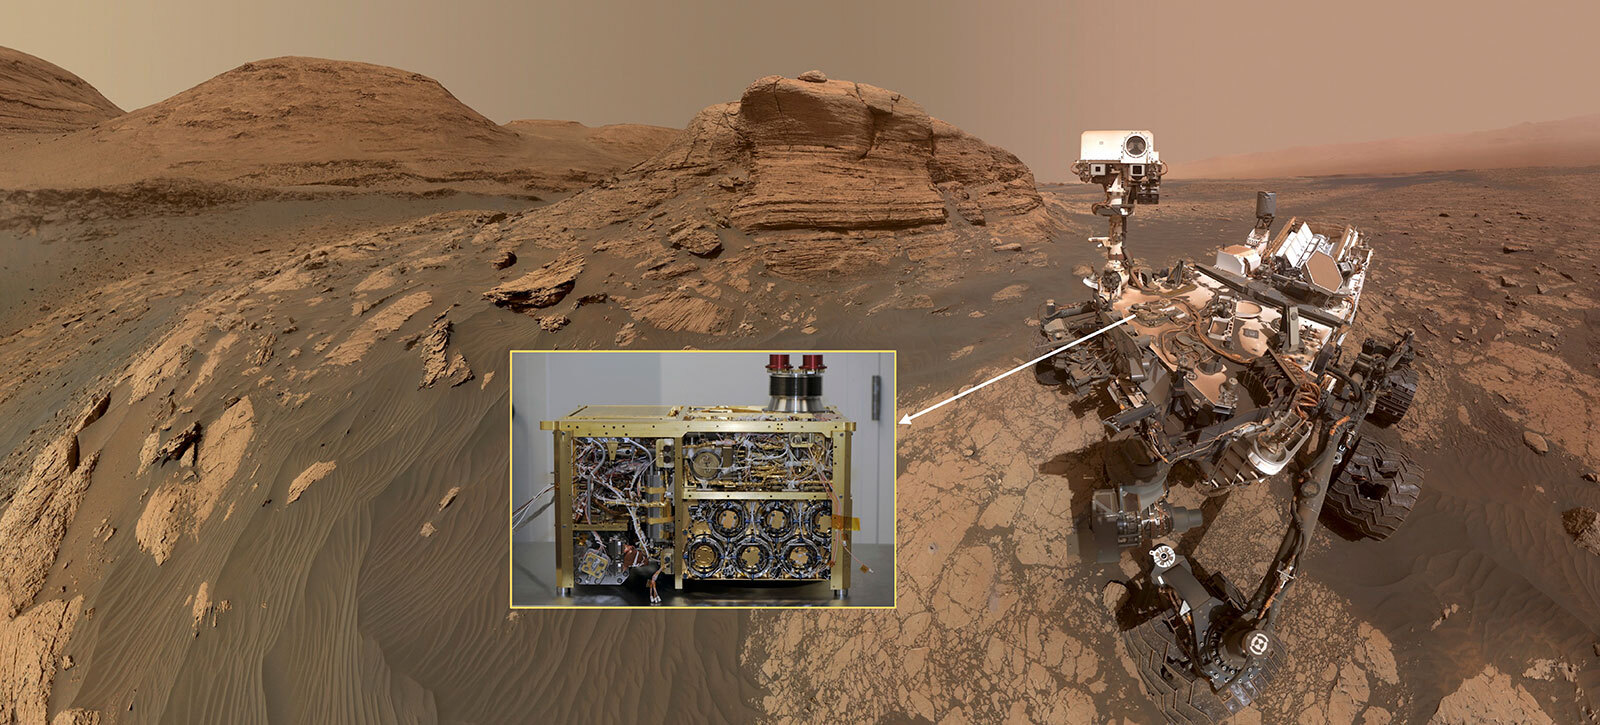 SAM's Top 5 Discoveries Aboard NASA's Curiosity Rover at Mars